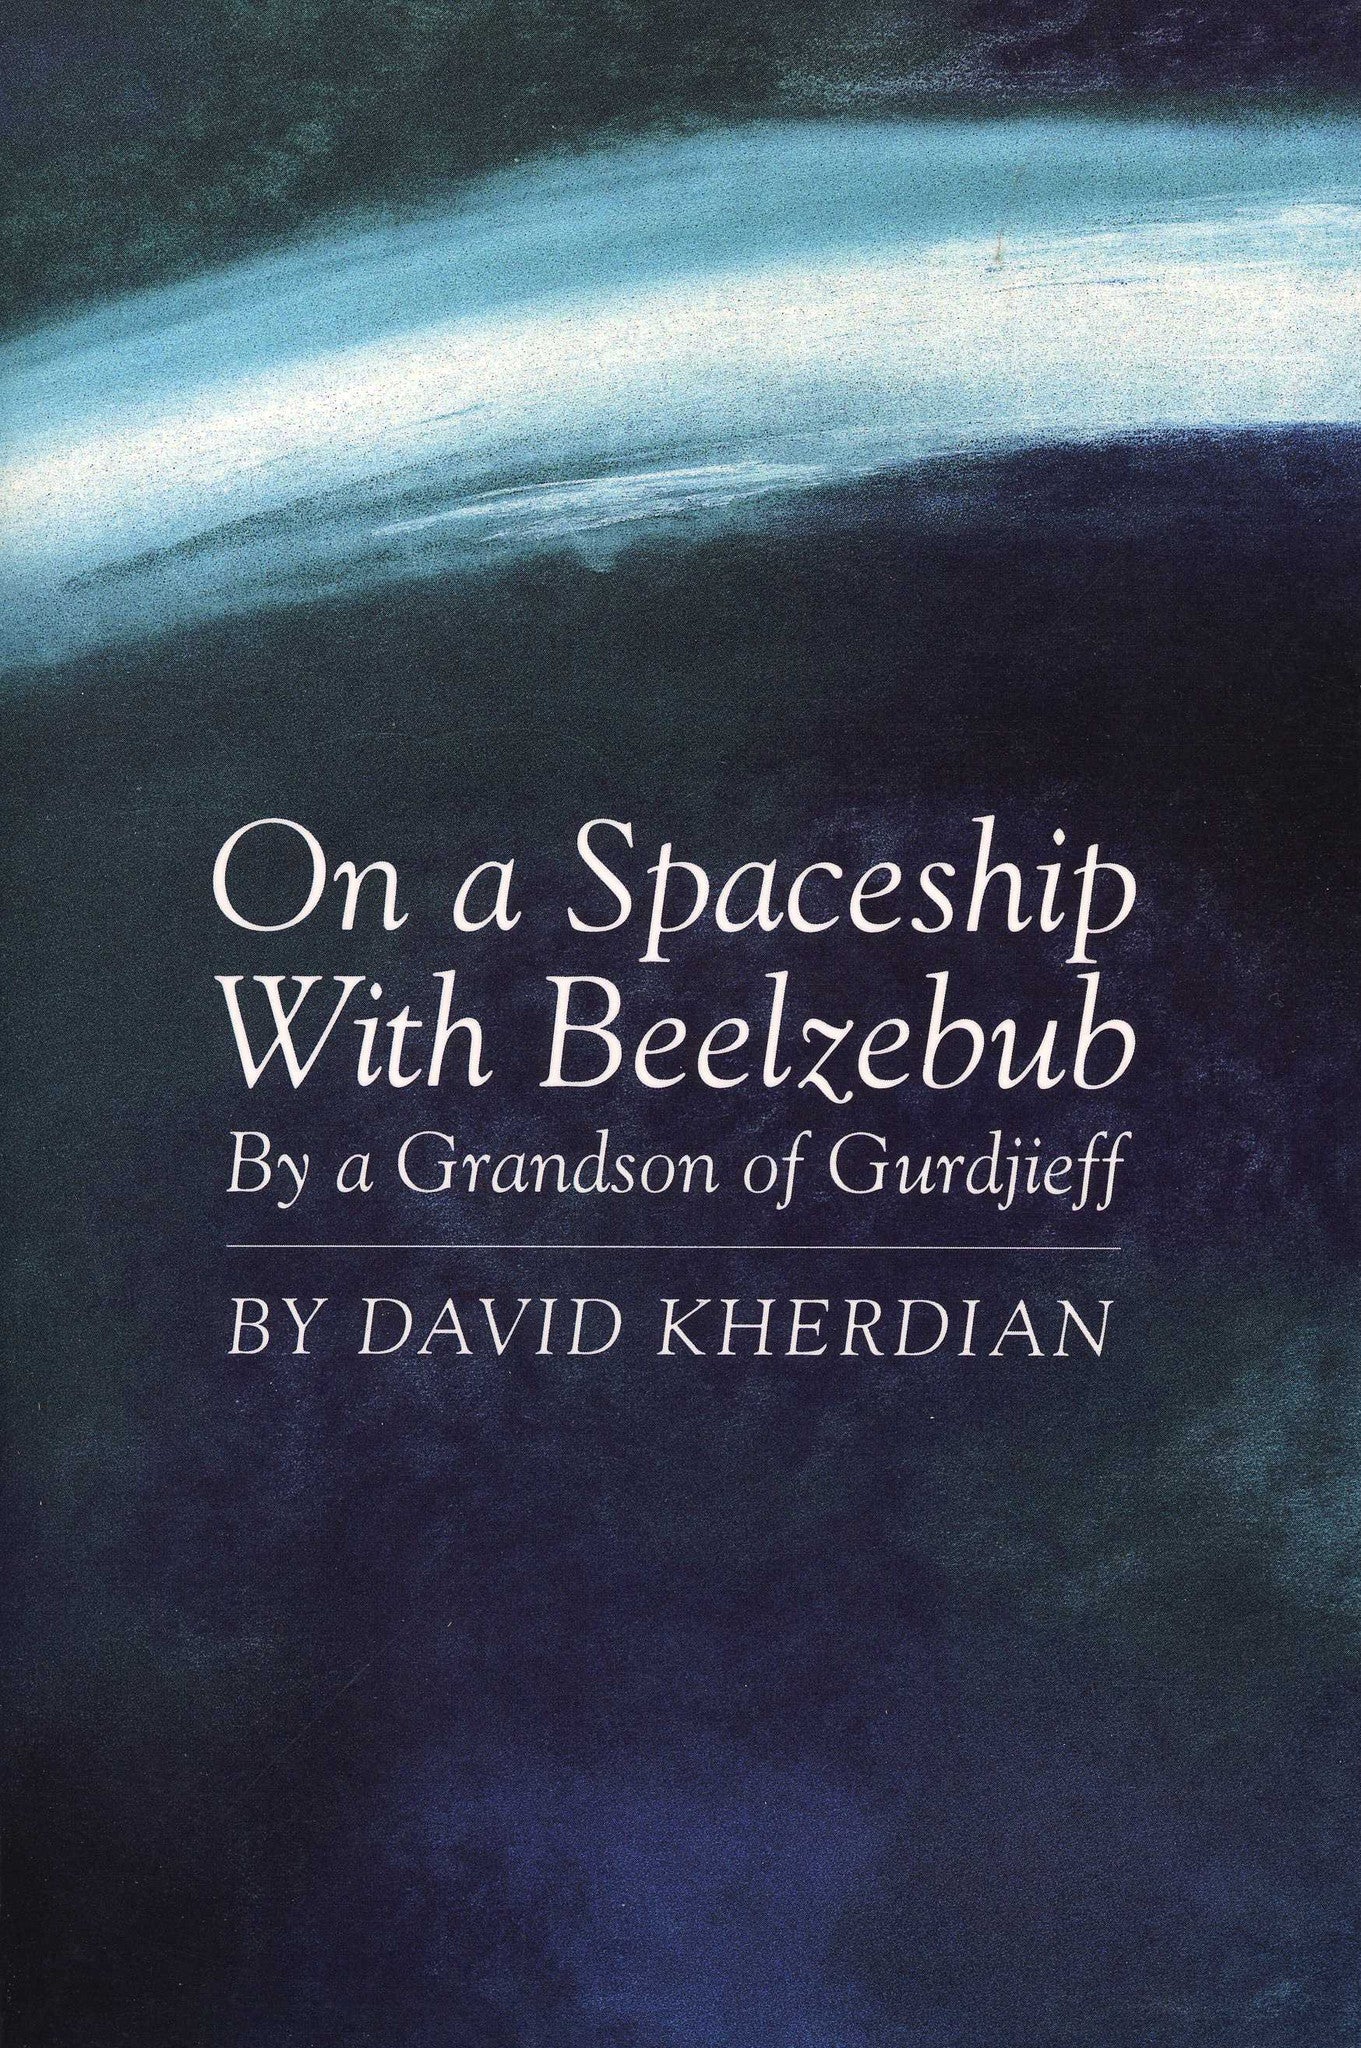 ON A SPACESHIP WITH BEELZEBUB By a Grandson of Gurdjieff